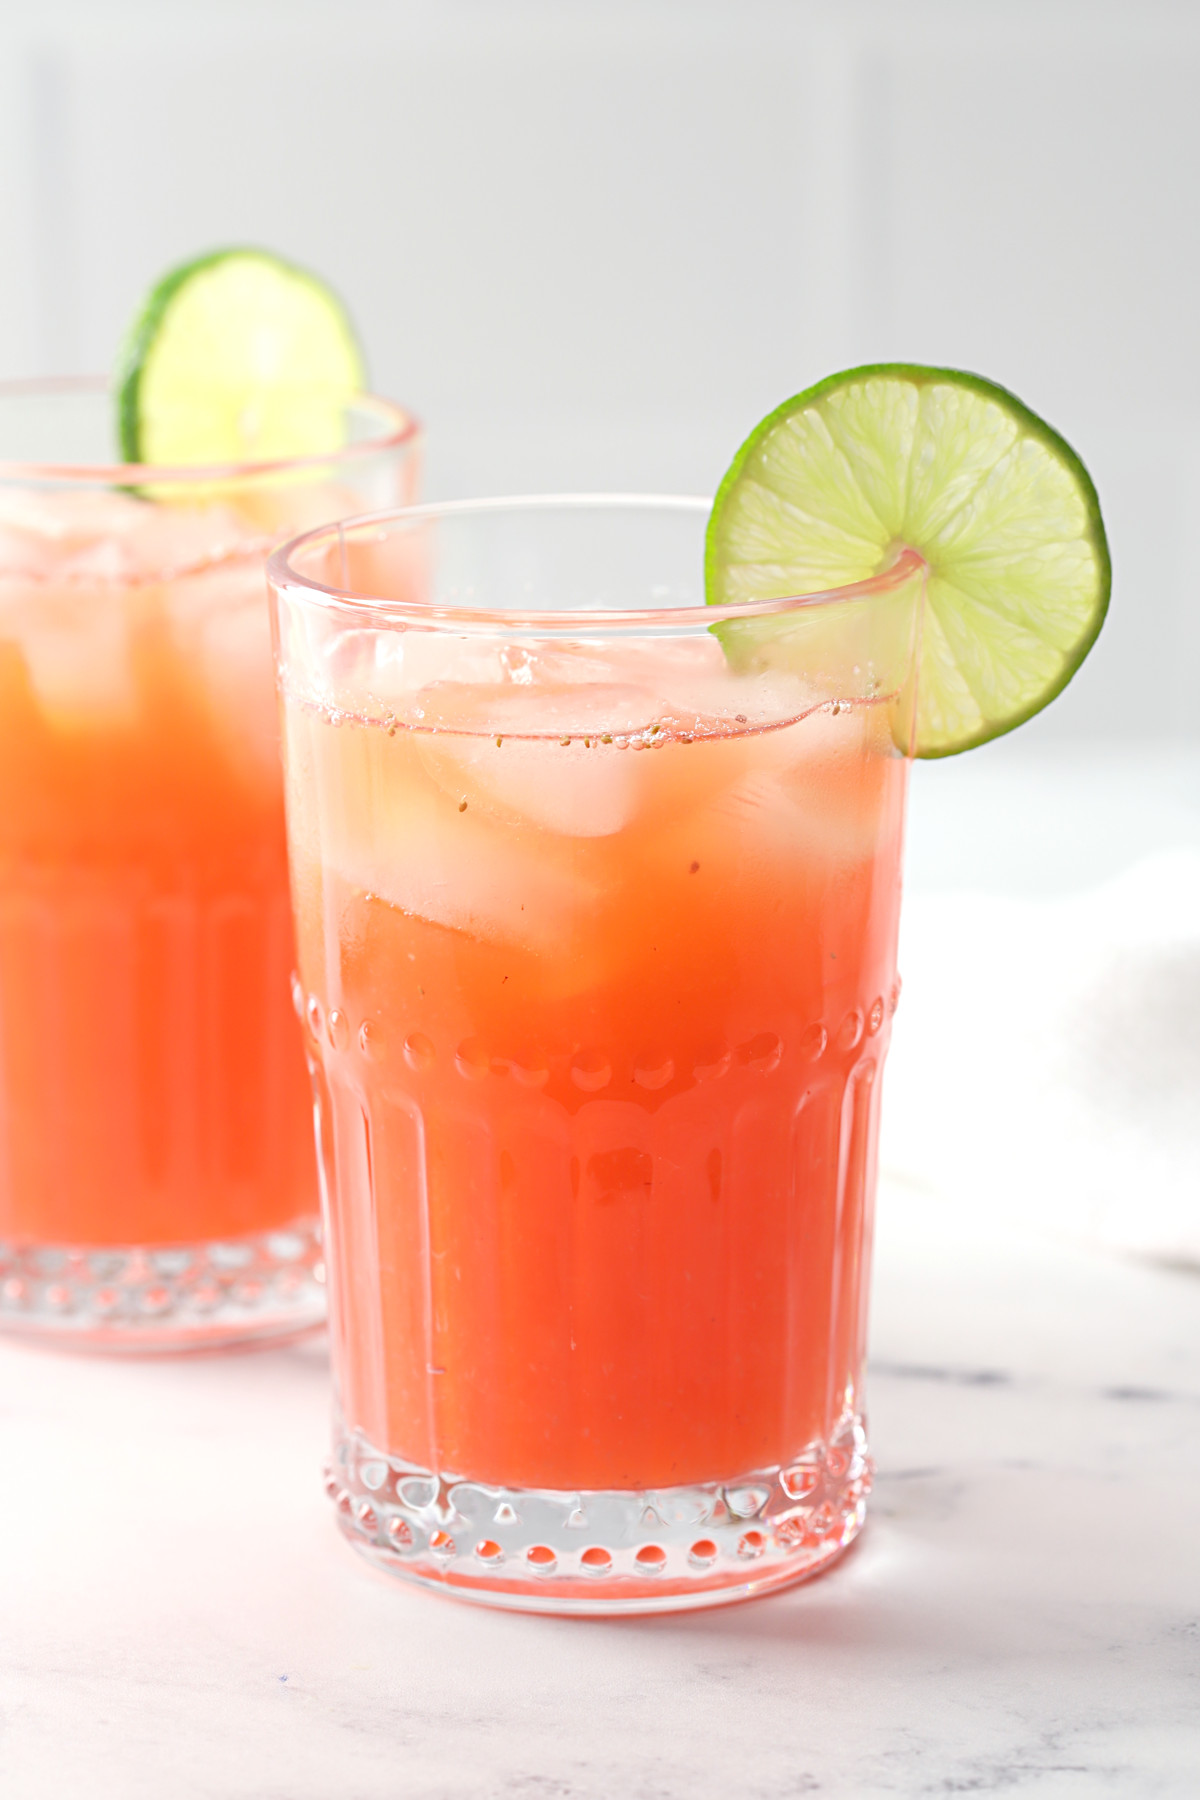 A glass of strawberry limeade garnished with a lime wedge.